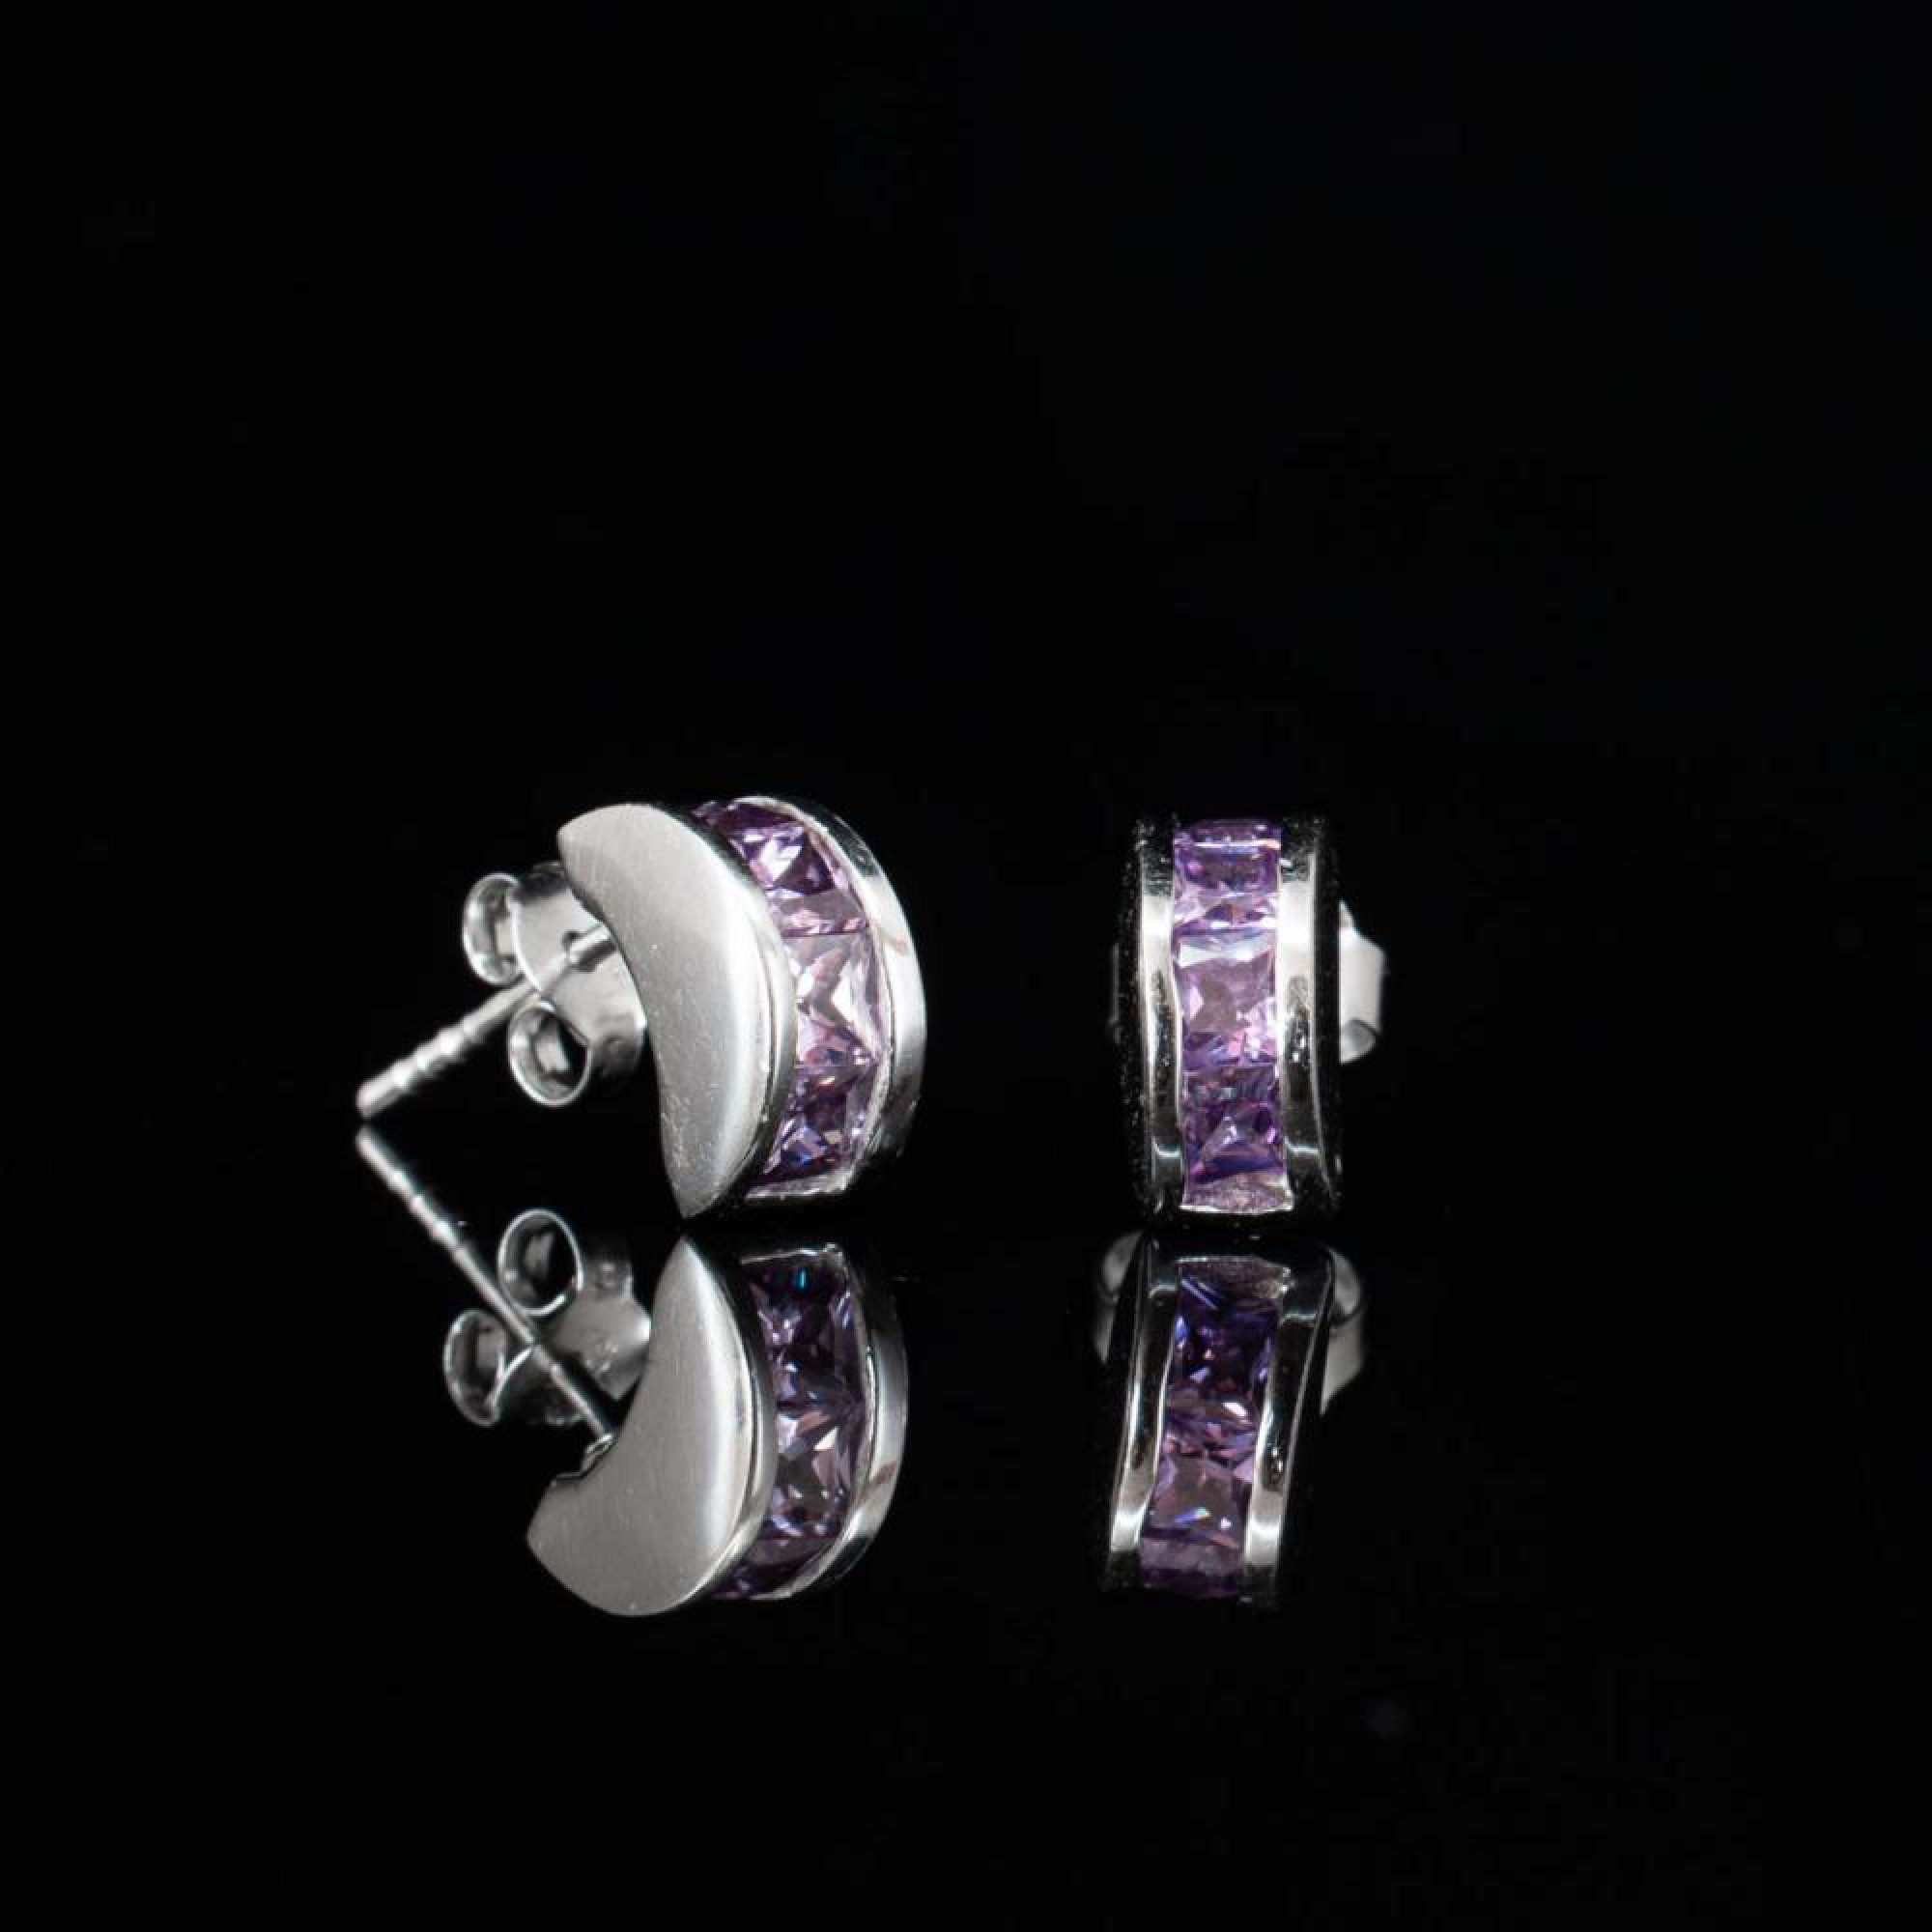 Silver earrings with amethyst stones